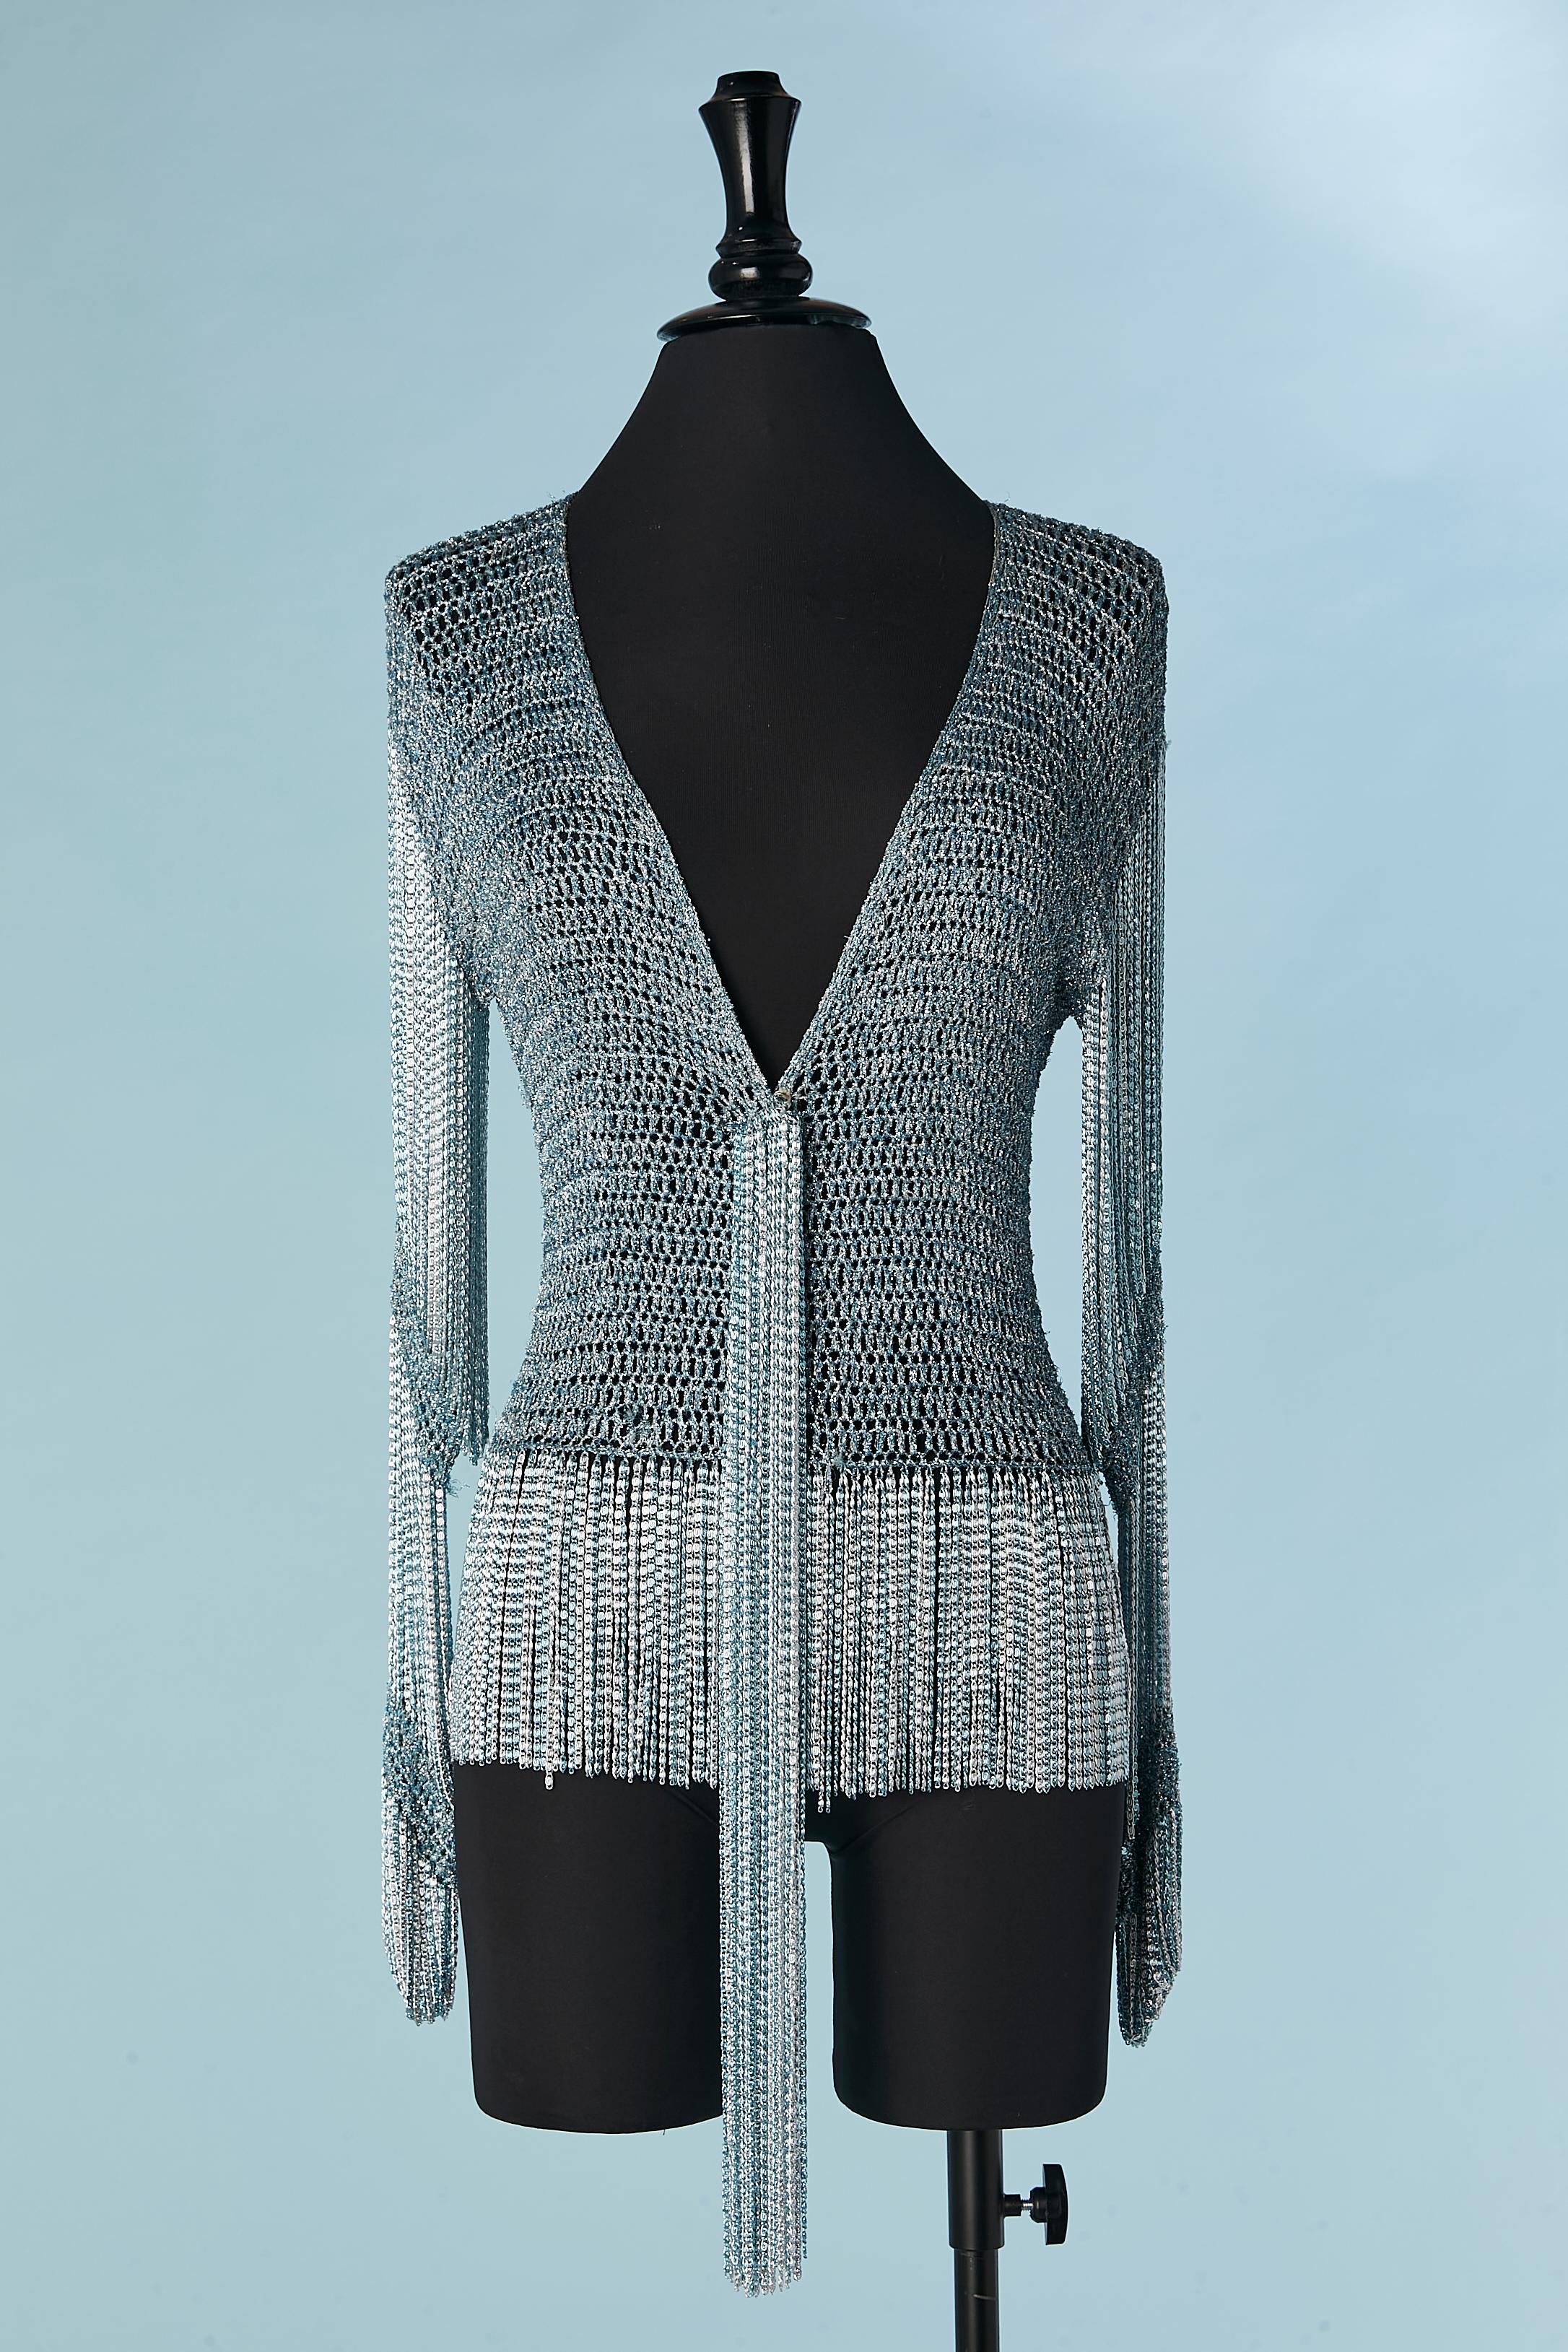 Silver and blue lamé knit and metal chain cardigan. 
The iconic Loris Azzaro top was owned in differents colors by both Tina turner and Audrey Hephburn. This one is a blue and silver lurex knit bodice with long chain tassel down the front , hiding